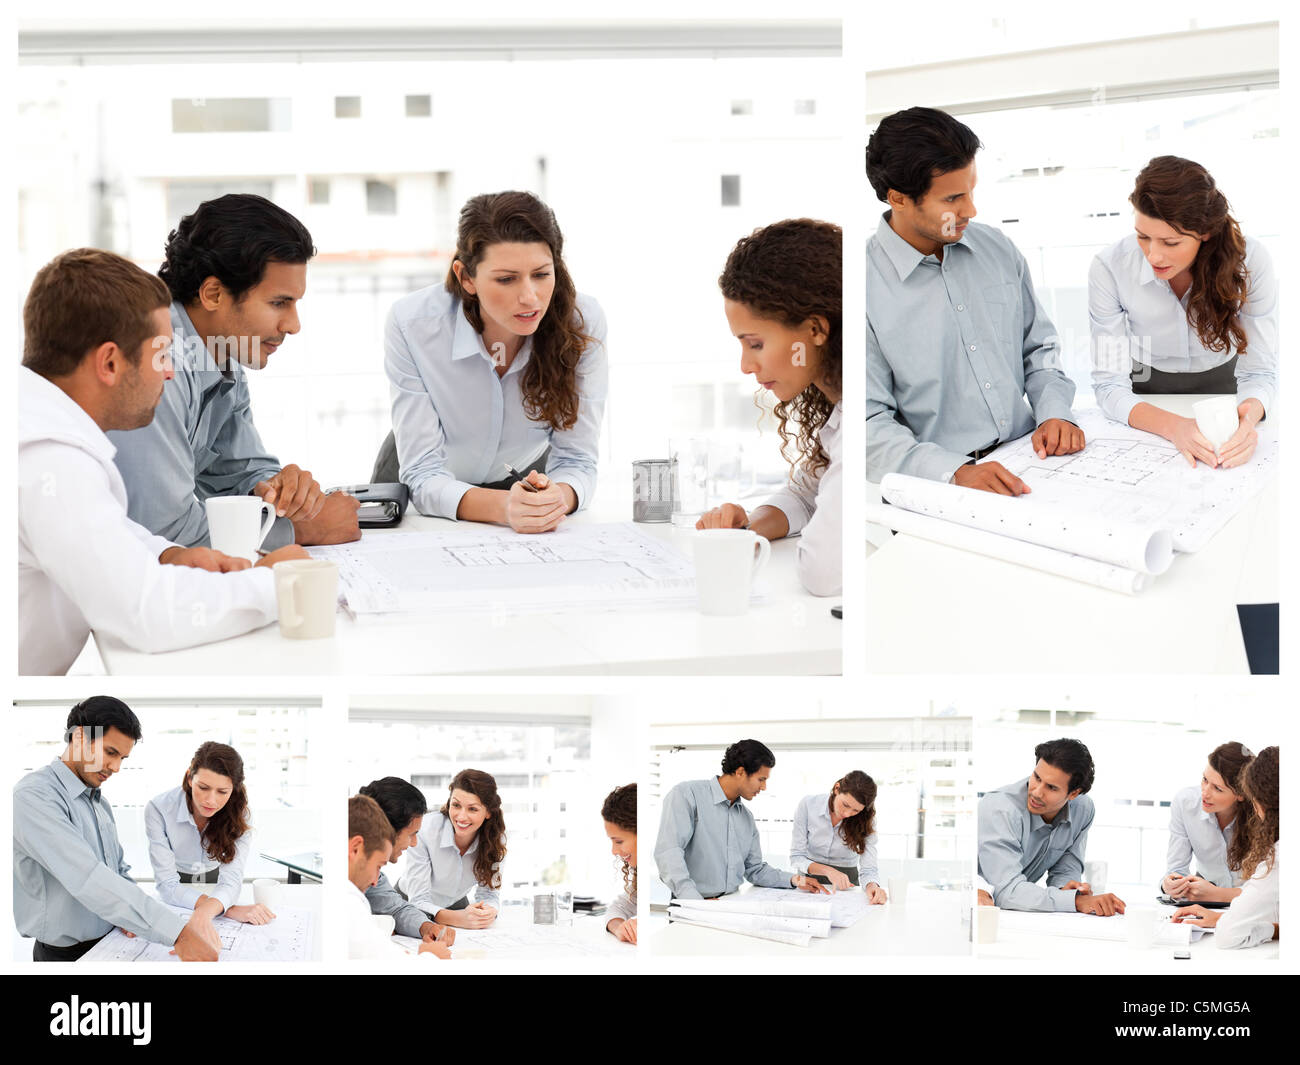 Collage of businesspeople working together Stock Photo